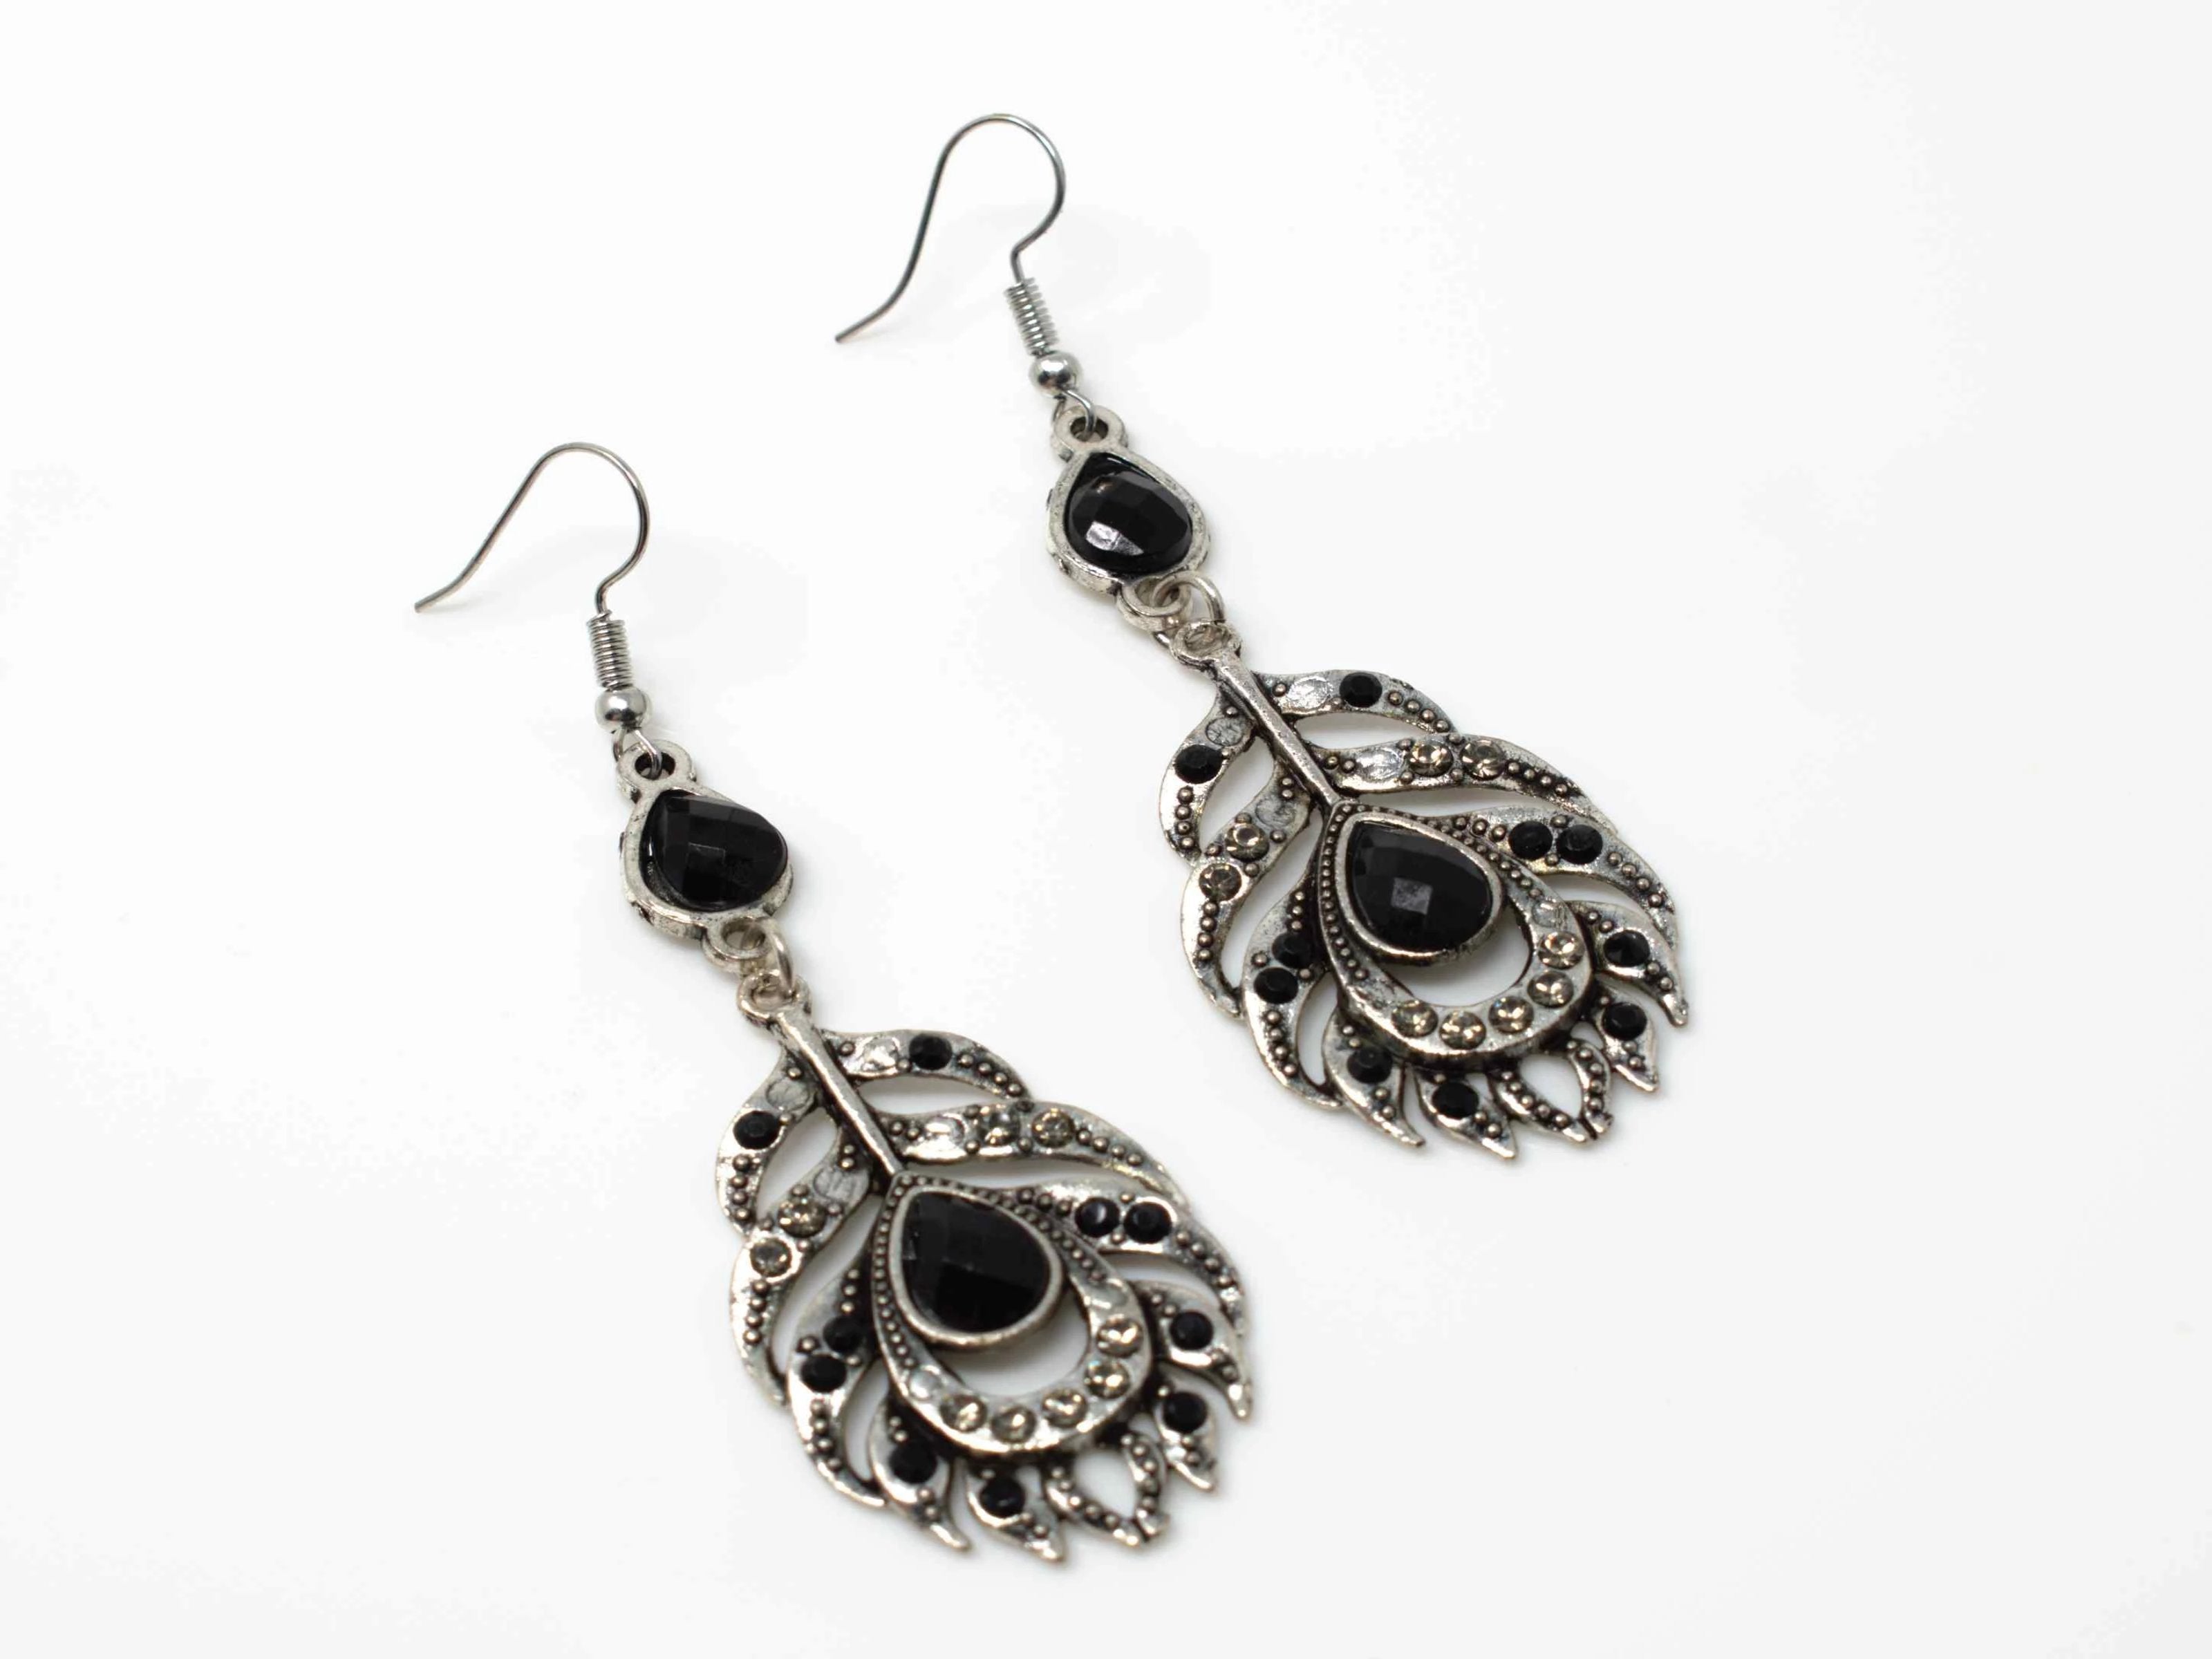 A dainty silver drop dangle feather fashion earring with black accent stones and a fish hook clasp.